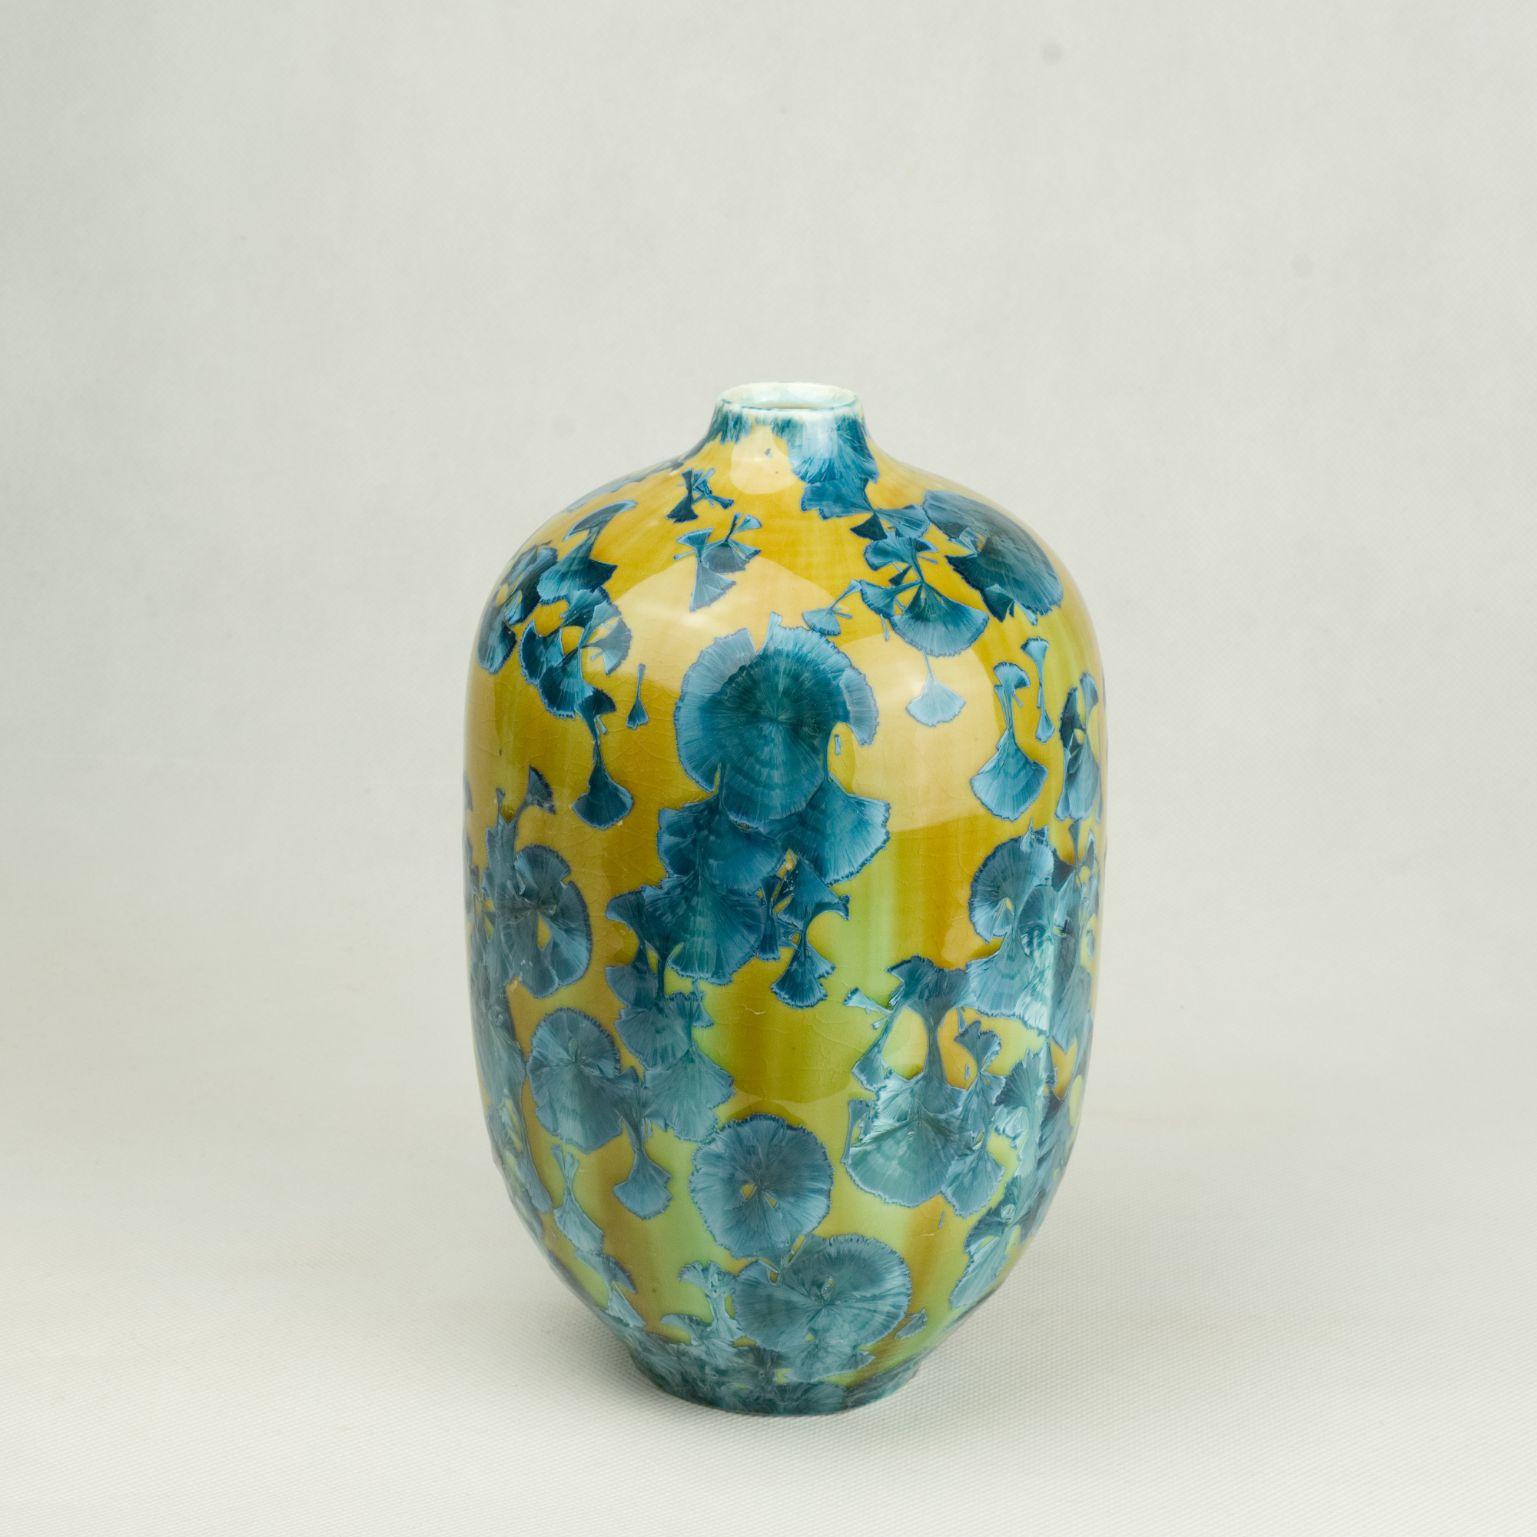 Volume 2 vase by Milan Pekar
Dimensions: d 15 x h 24 cm
Materials: Glaze, Porcelain

handmade in the Czech Republic. 

Also available: different colors and patterns

Established own studio August 2009 – Focus mainly on porcelain, developing